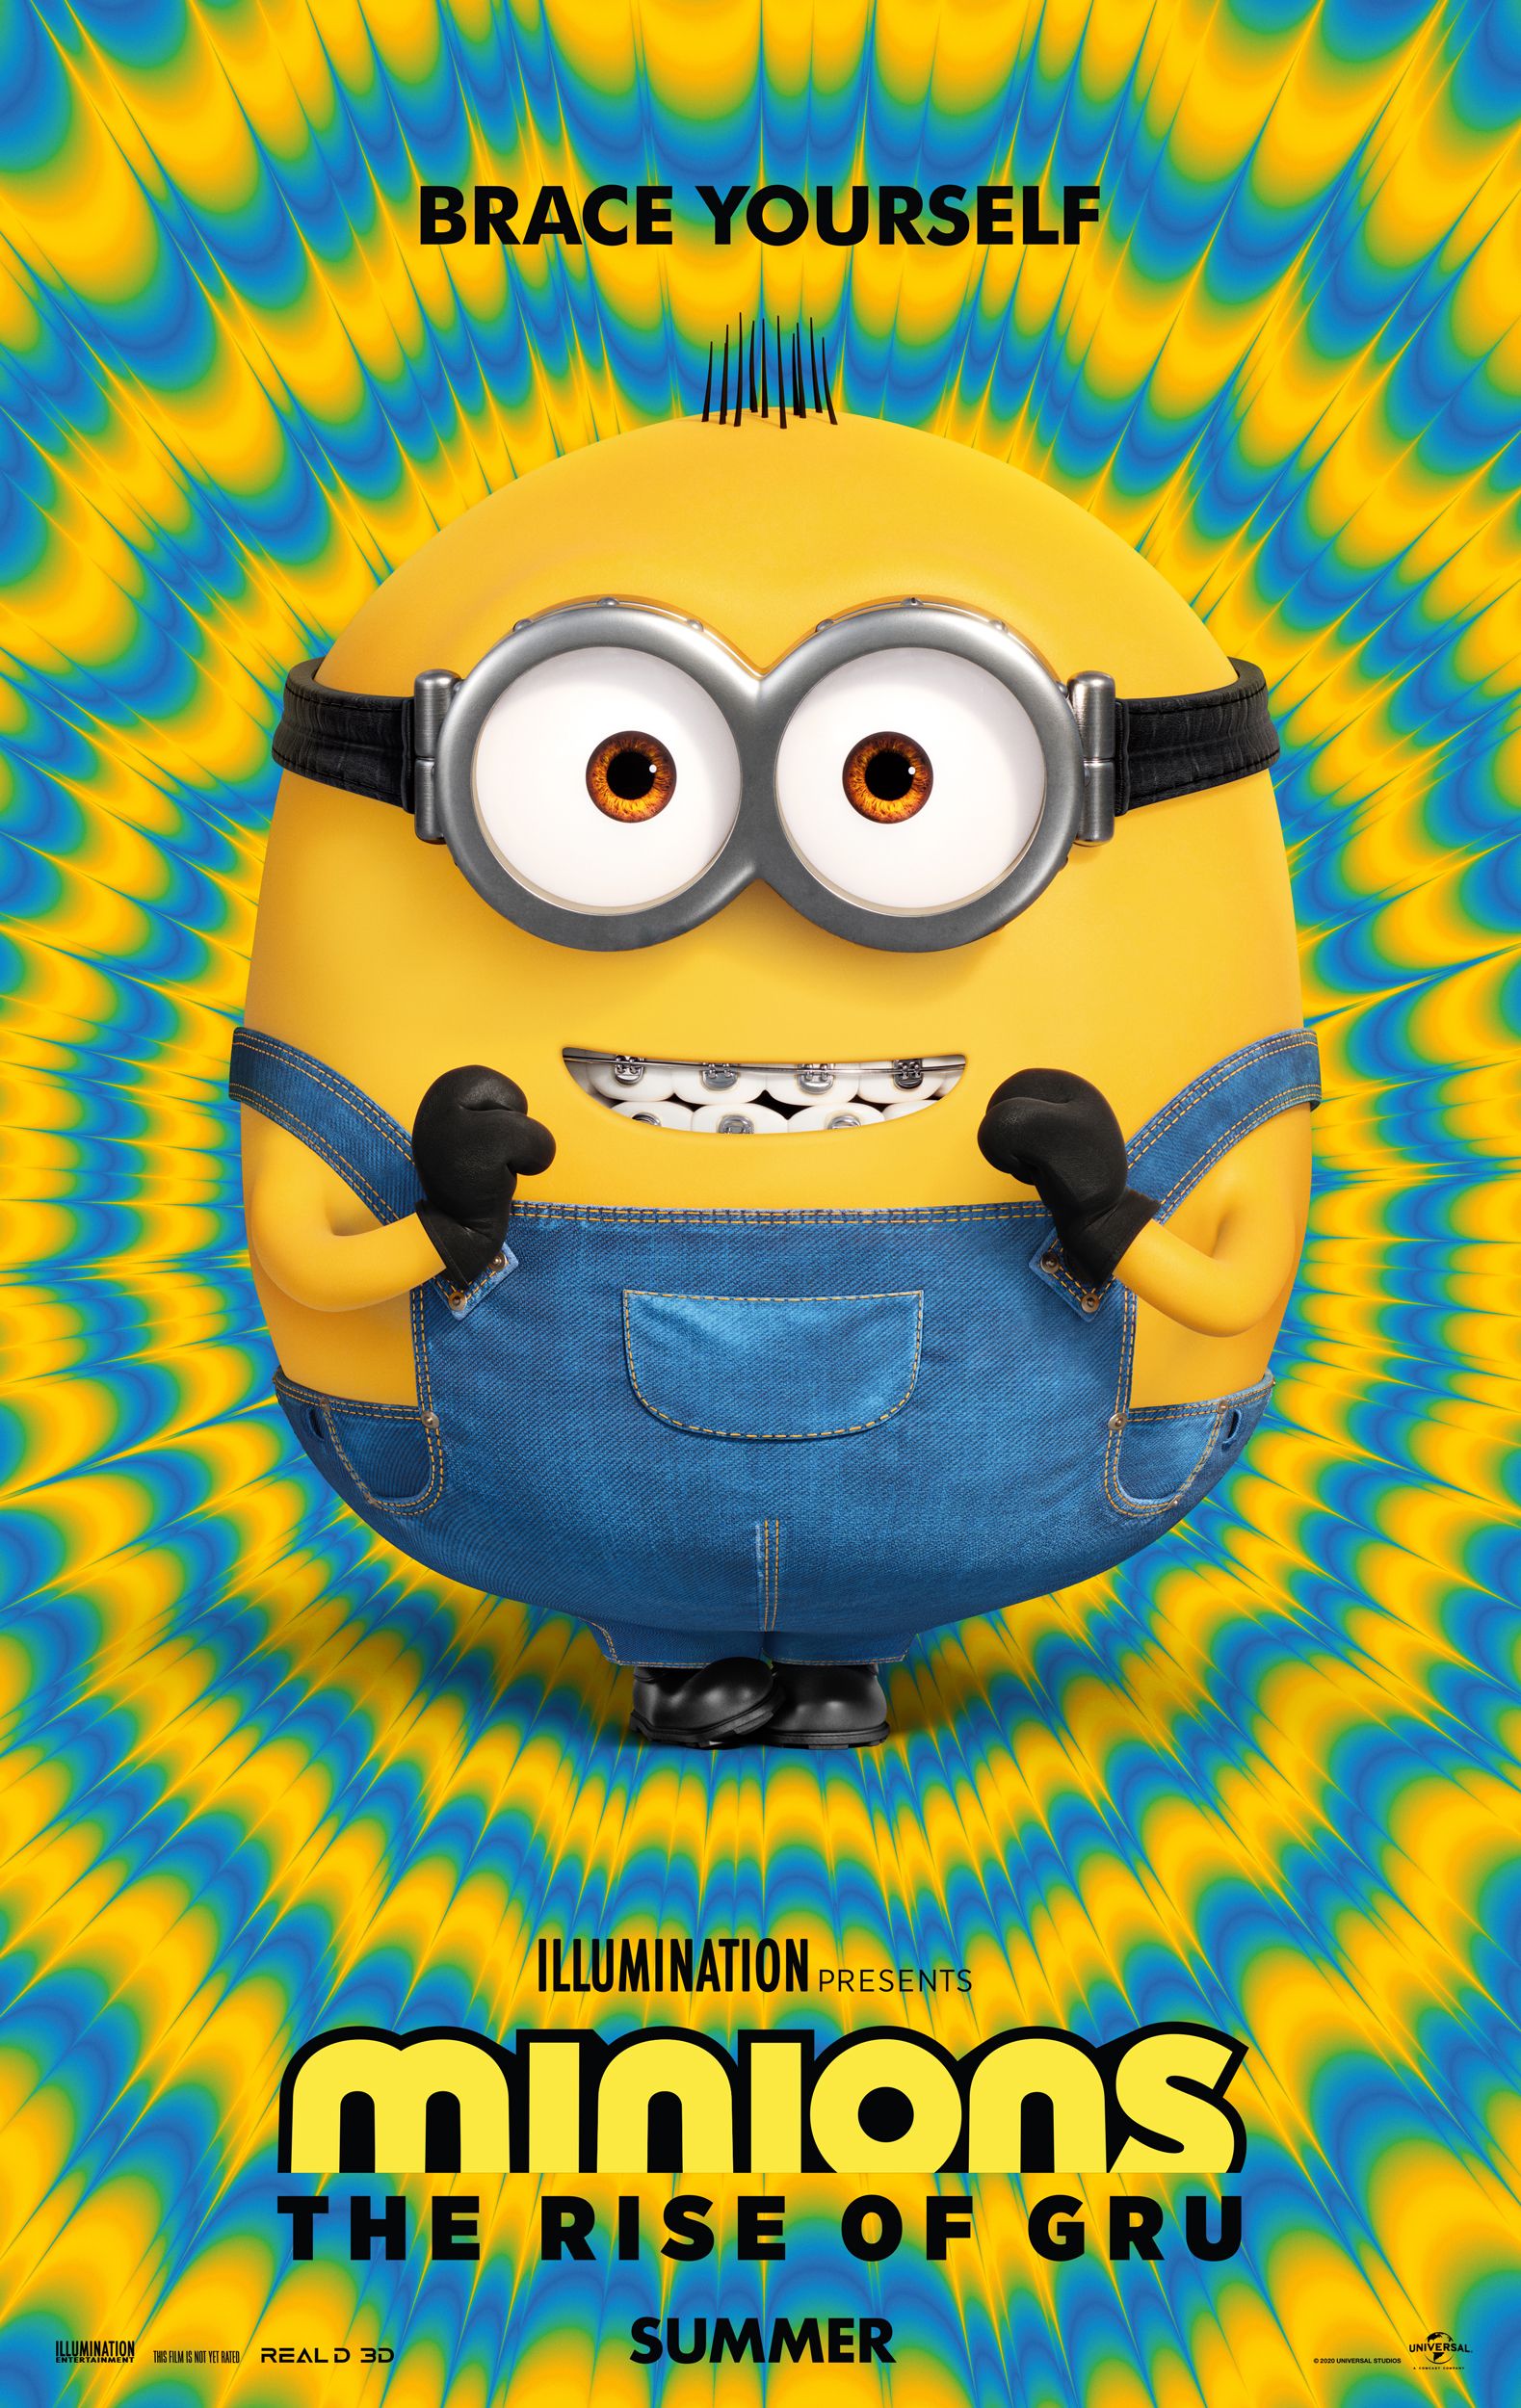 Minions: The Rise of Gru Super Bowl TV Spot Offers First Footage of Sequel